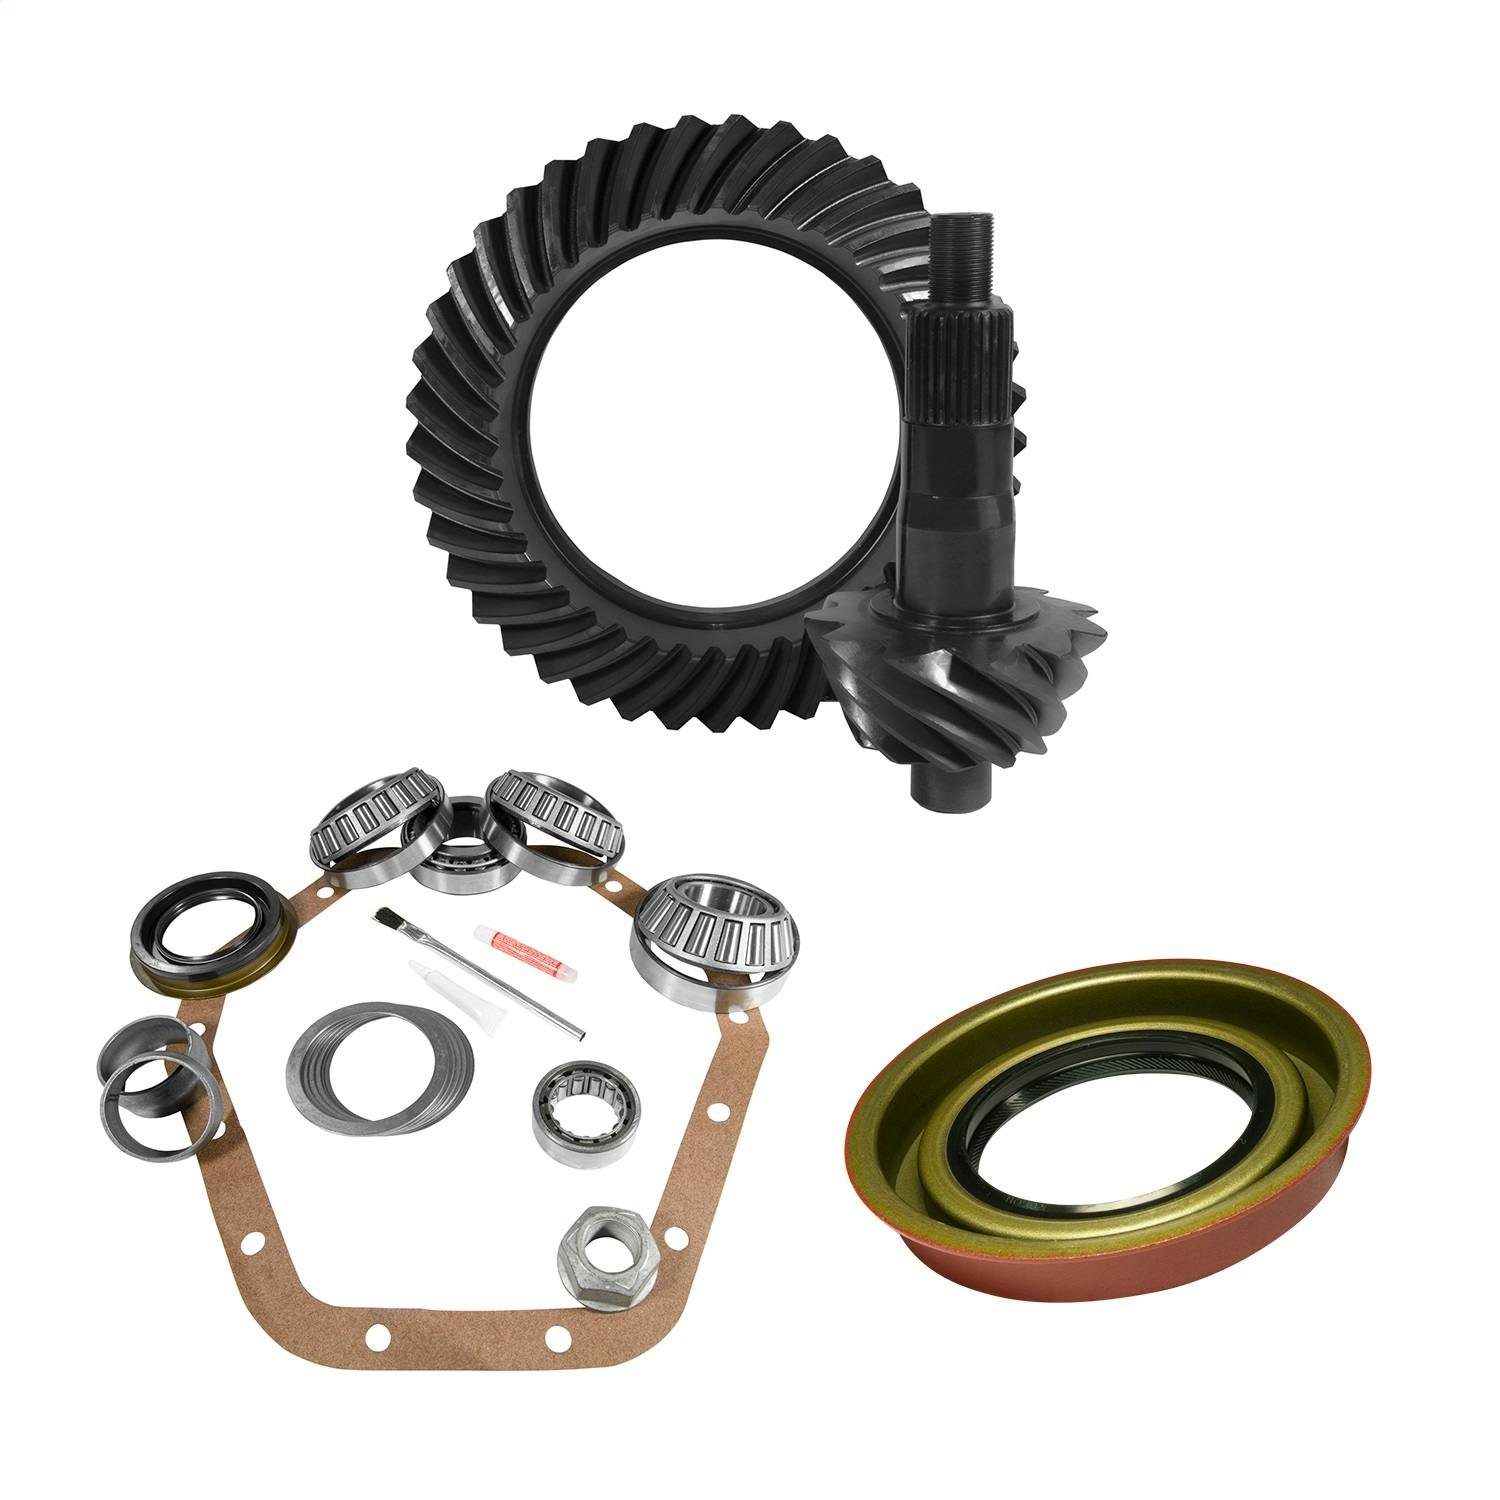 USA Standard Gear ZGK2121 10.5in. GM 14 Bolt 4.56 Thick Rear Ring/Pinion and Install Kit